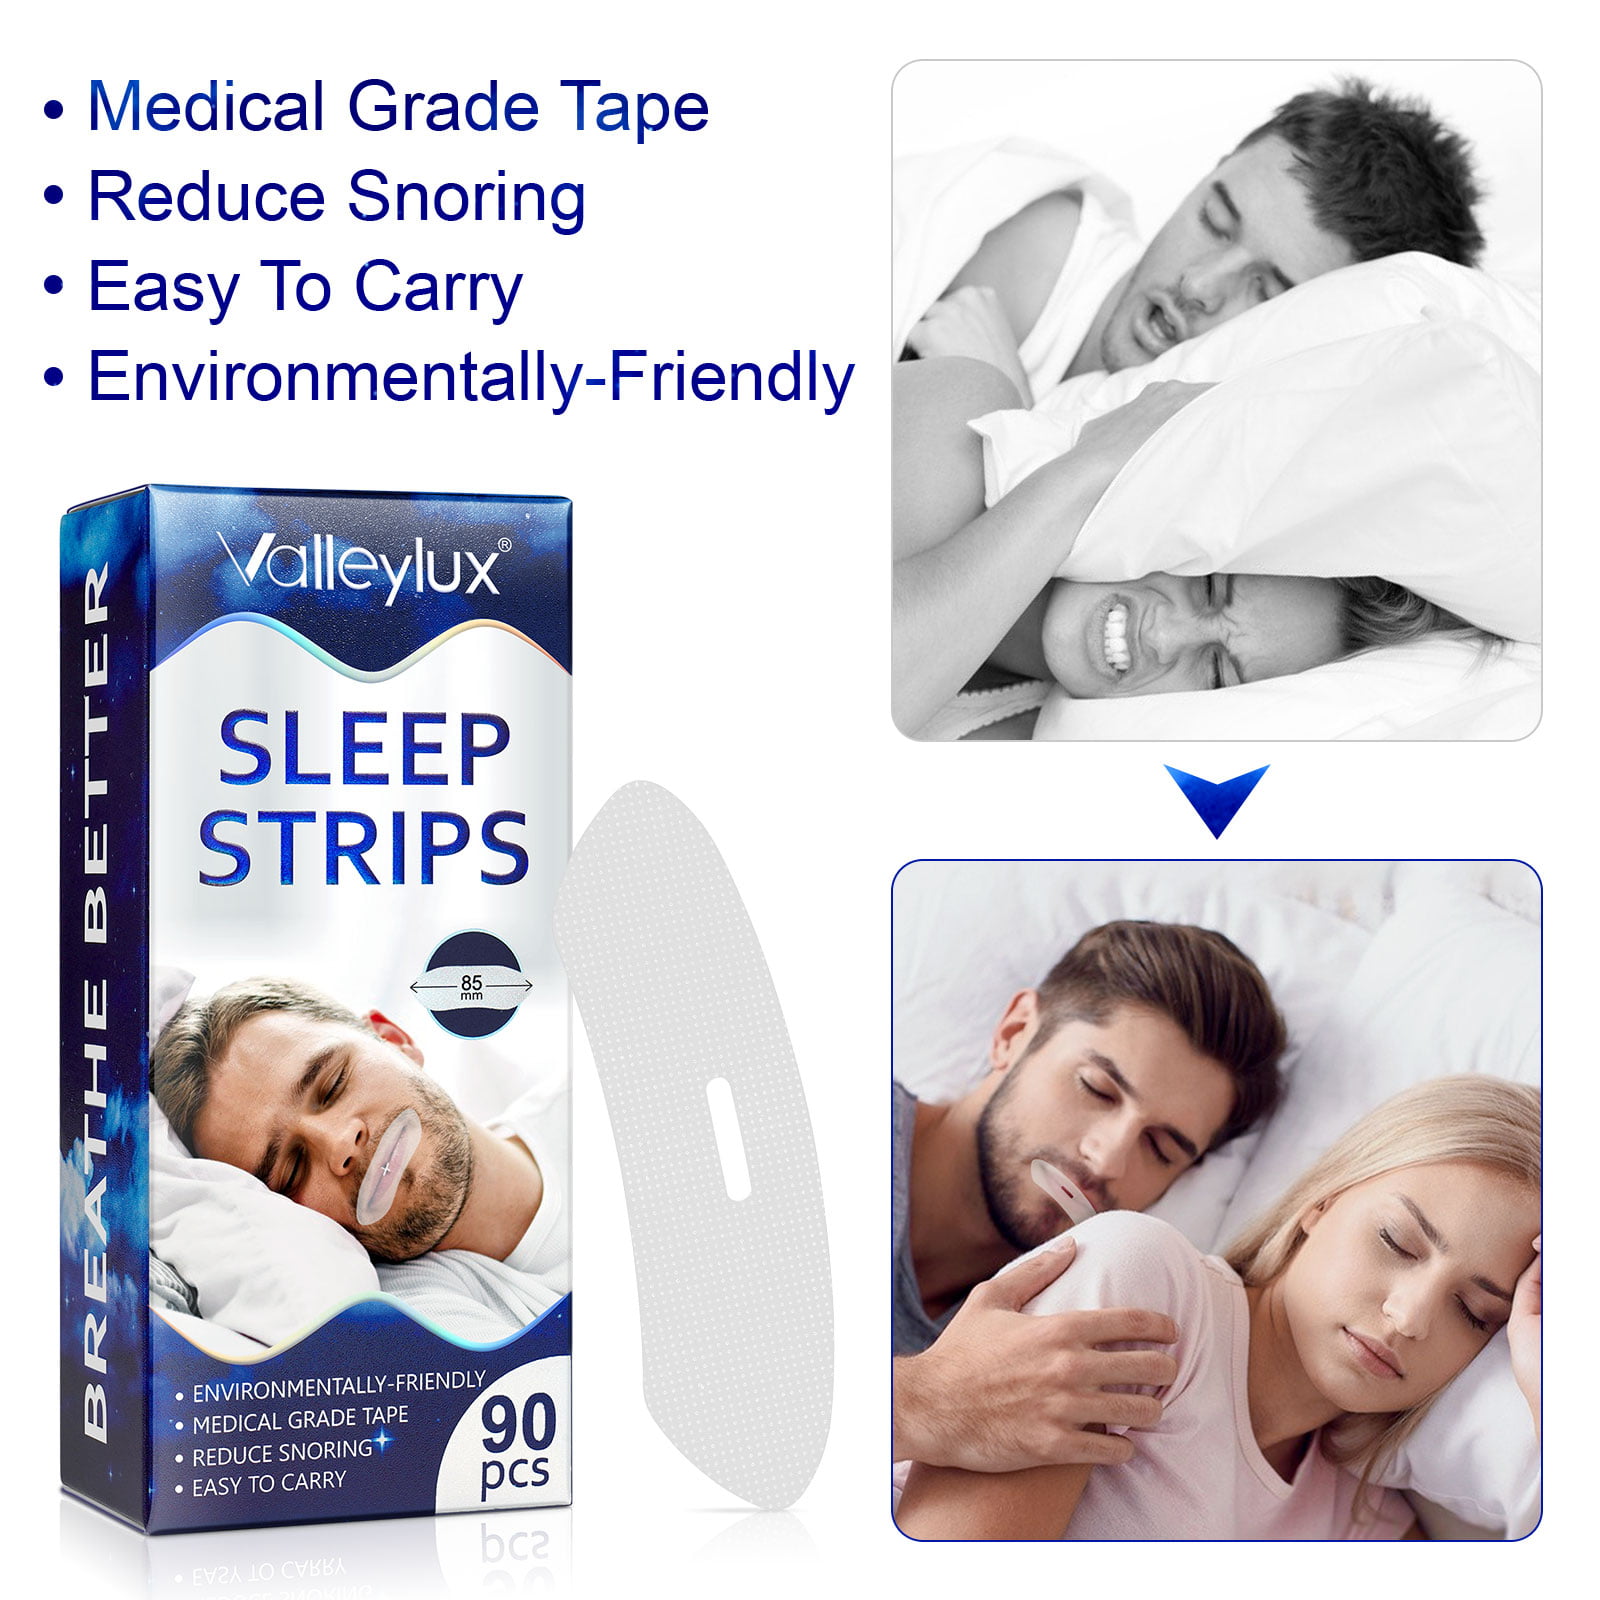 Mouth Tape: Does It Cause Better Sleep Overnight? - MoveWell™